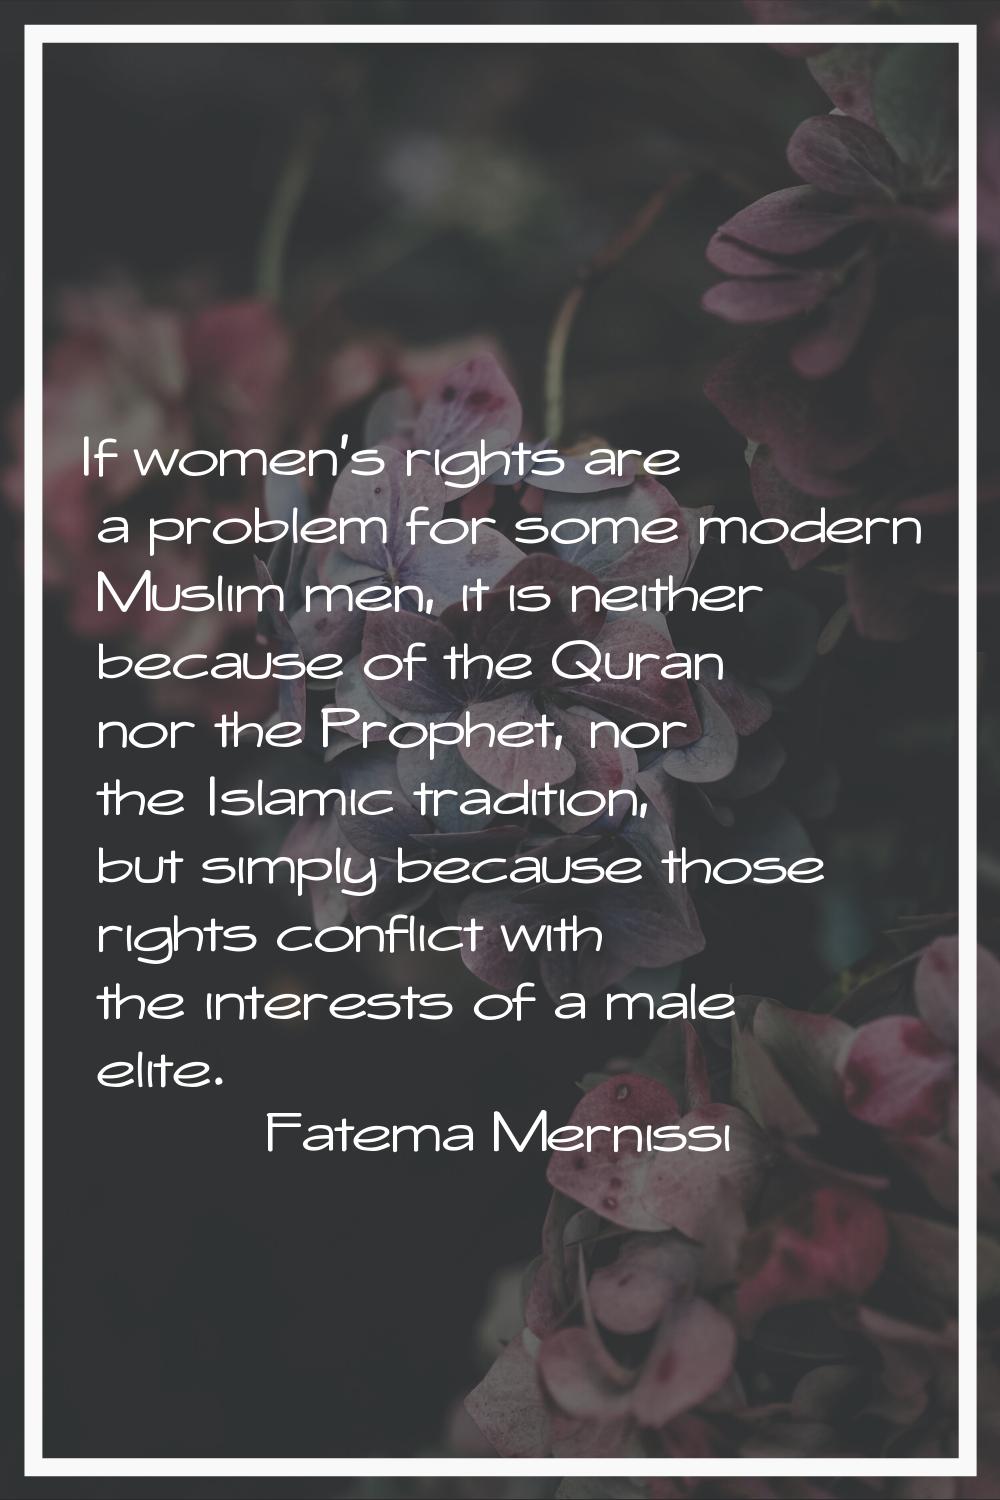 If women's rights are a problem for some modern Muslim men, it is neither because of the Quran nor 